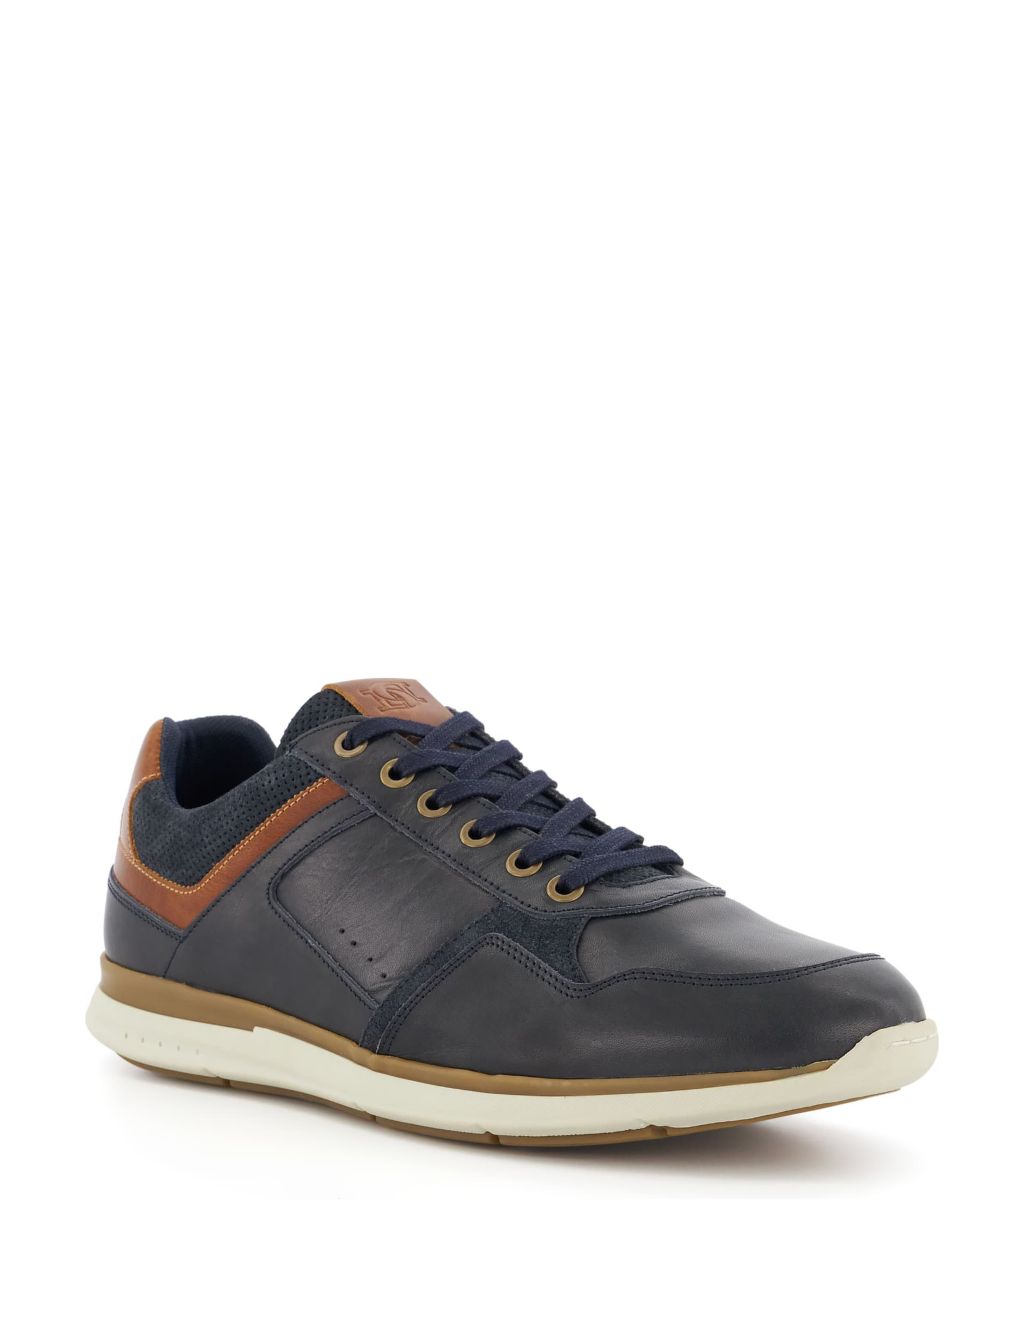 Leather Lace Up Panel Trainers image 2